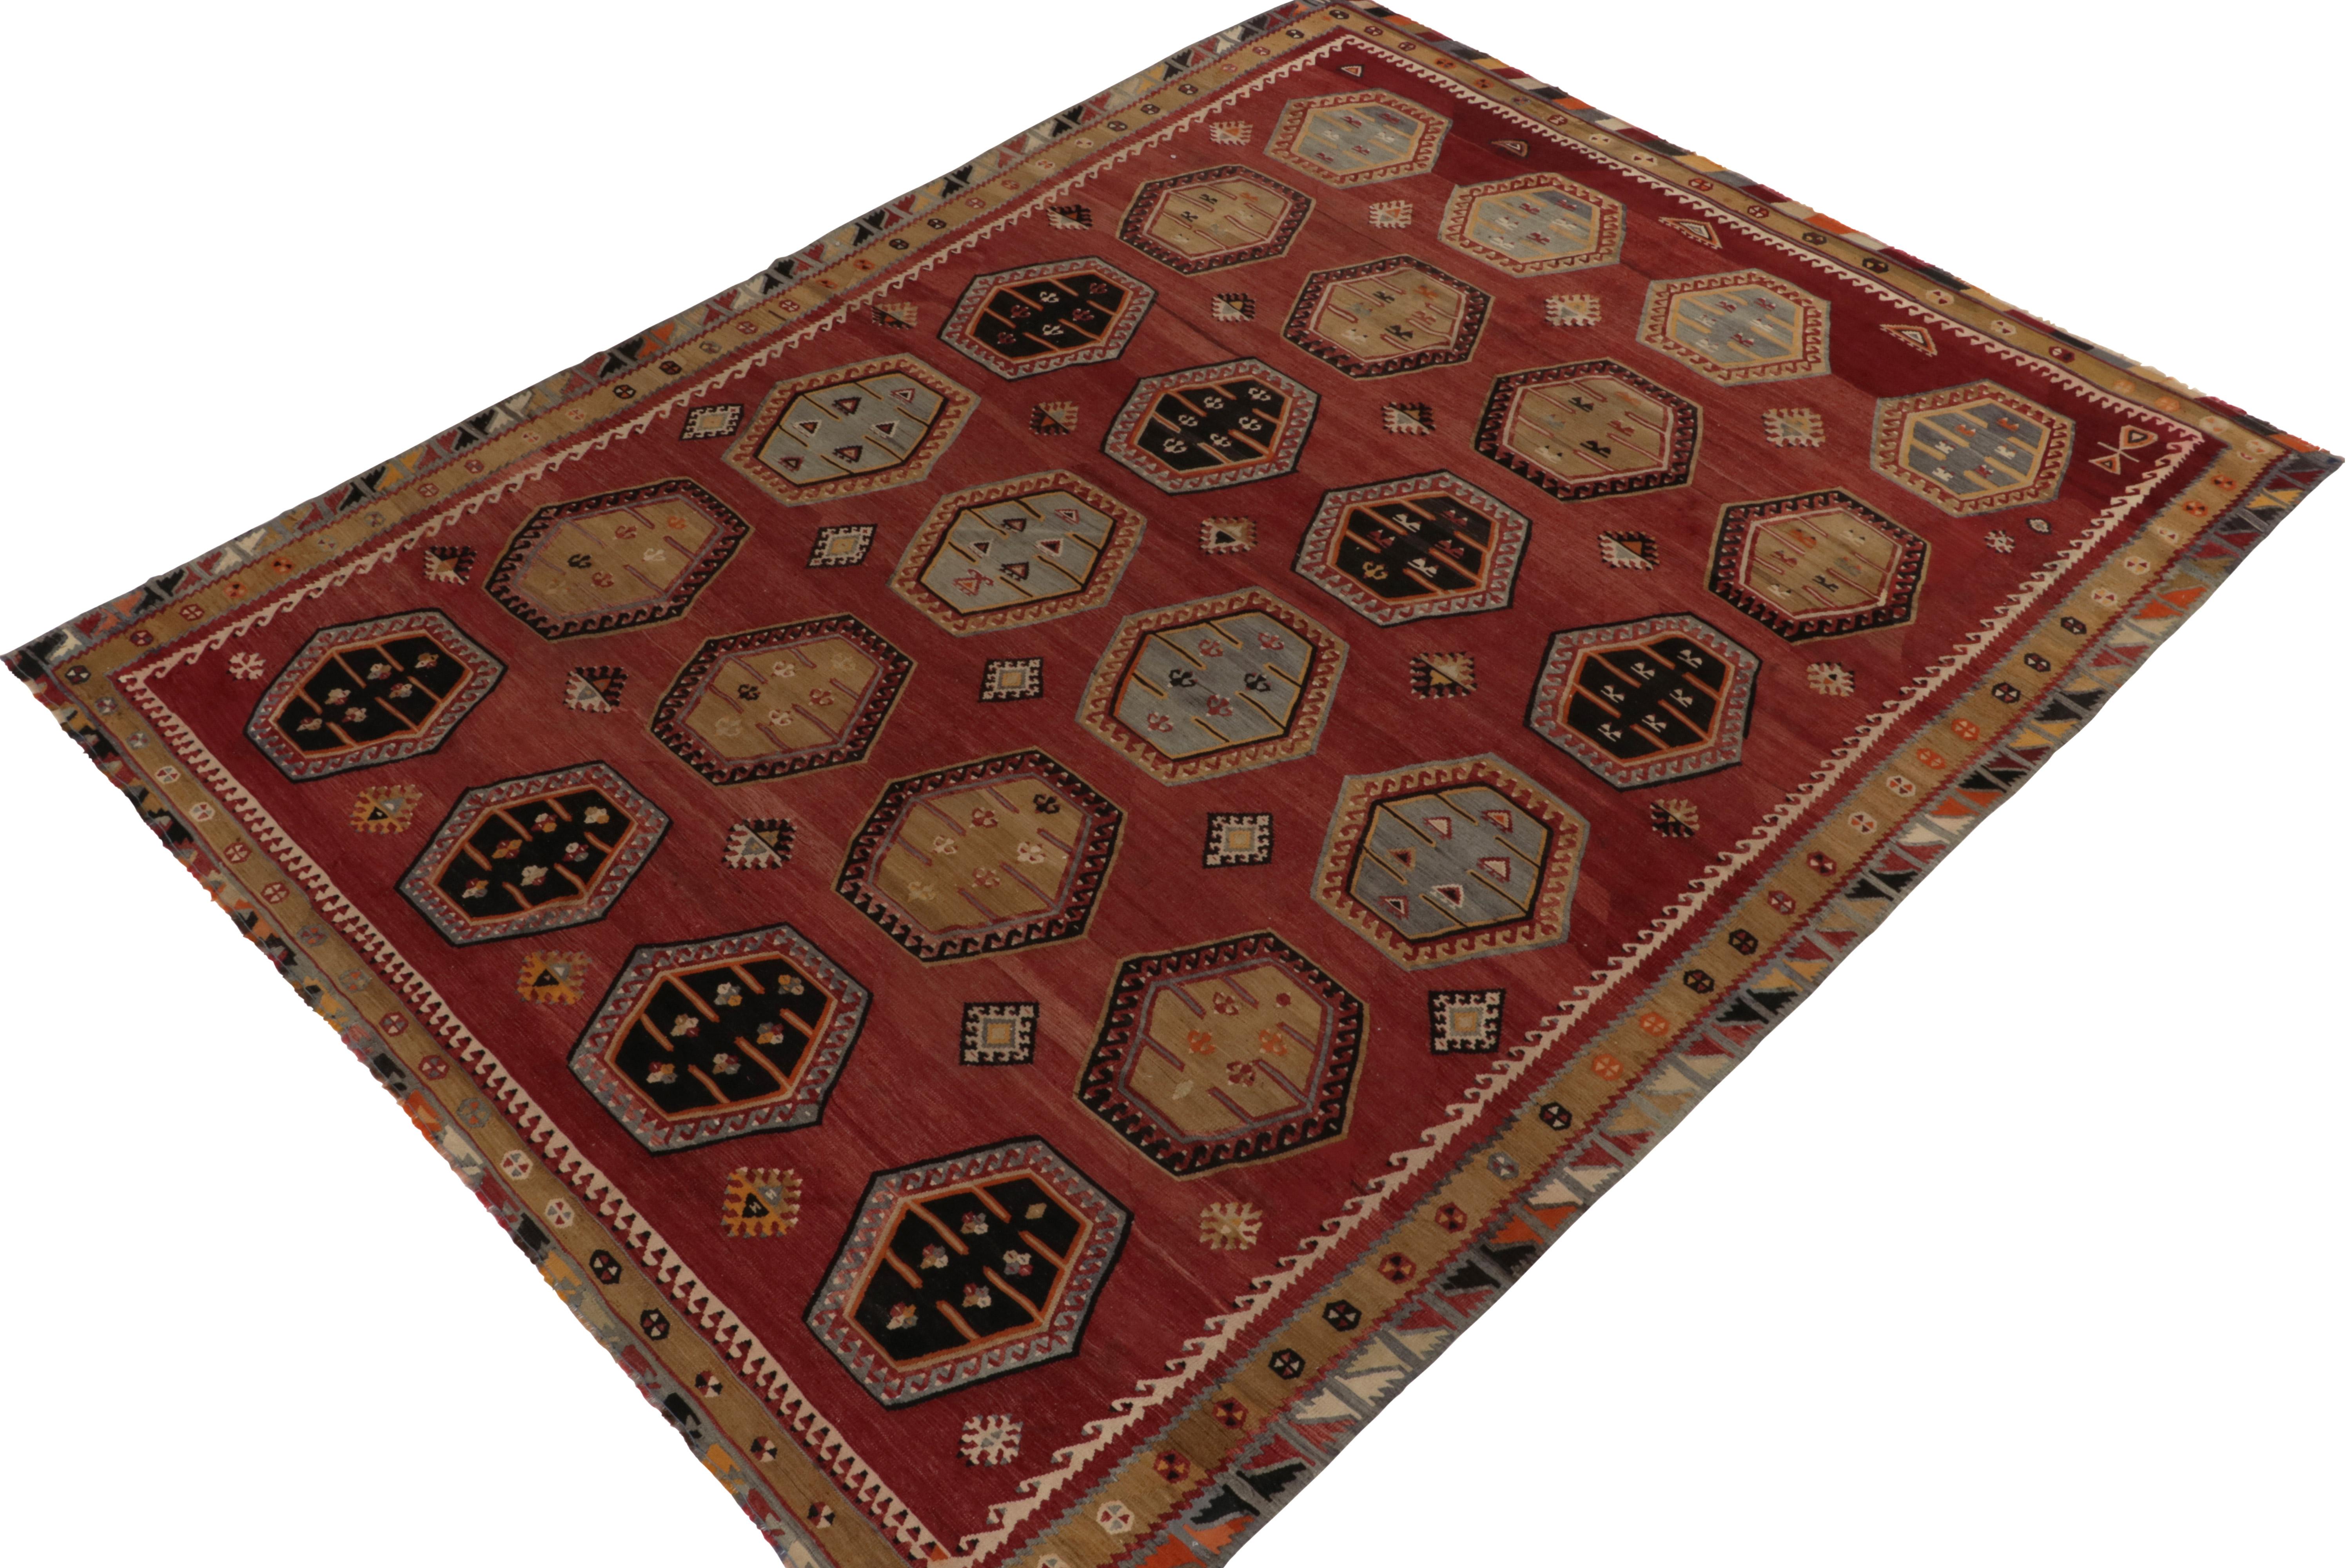 Originating between 1950-1960, a rare 8x11 vintage kilim rug believed to hail from mid-century Anatolia in Turkey. 

Handwoven in wool, the tones of red, beige-brown and blue play harmoniously together for a rustic tribal appeal in the field’s